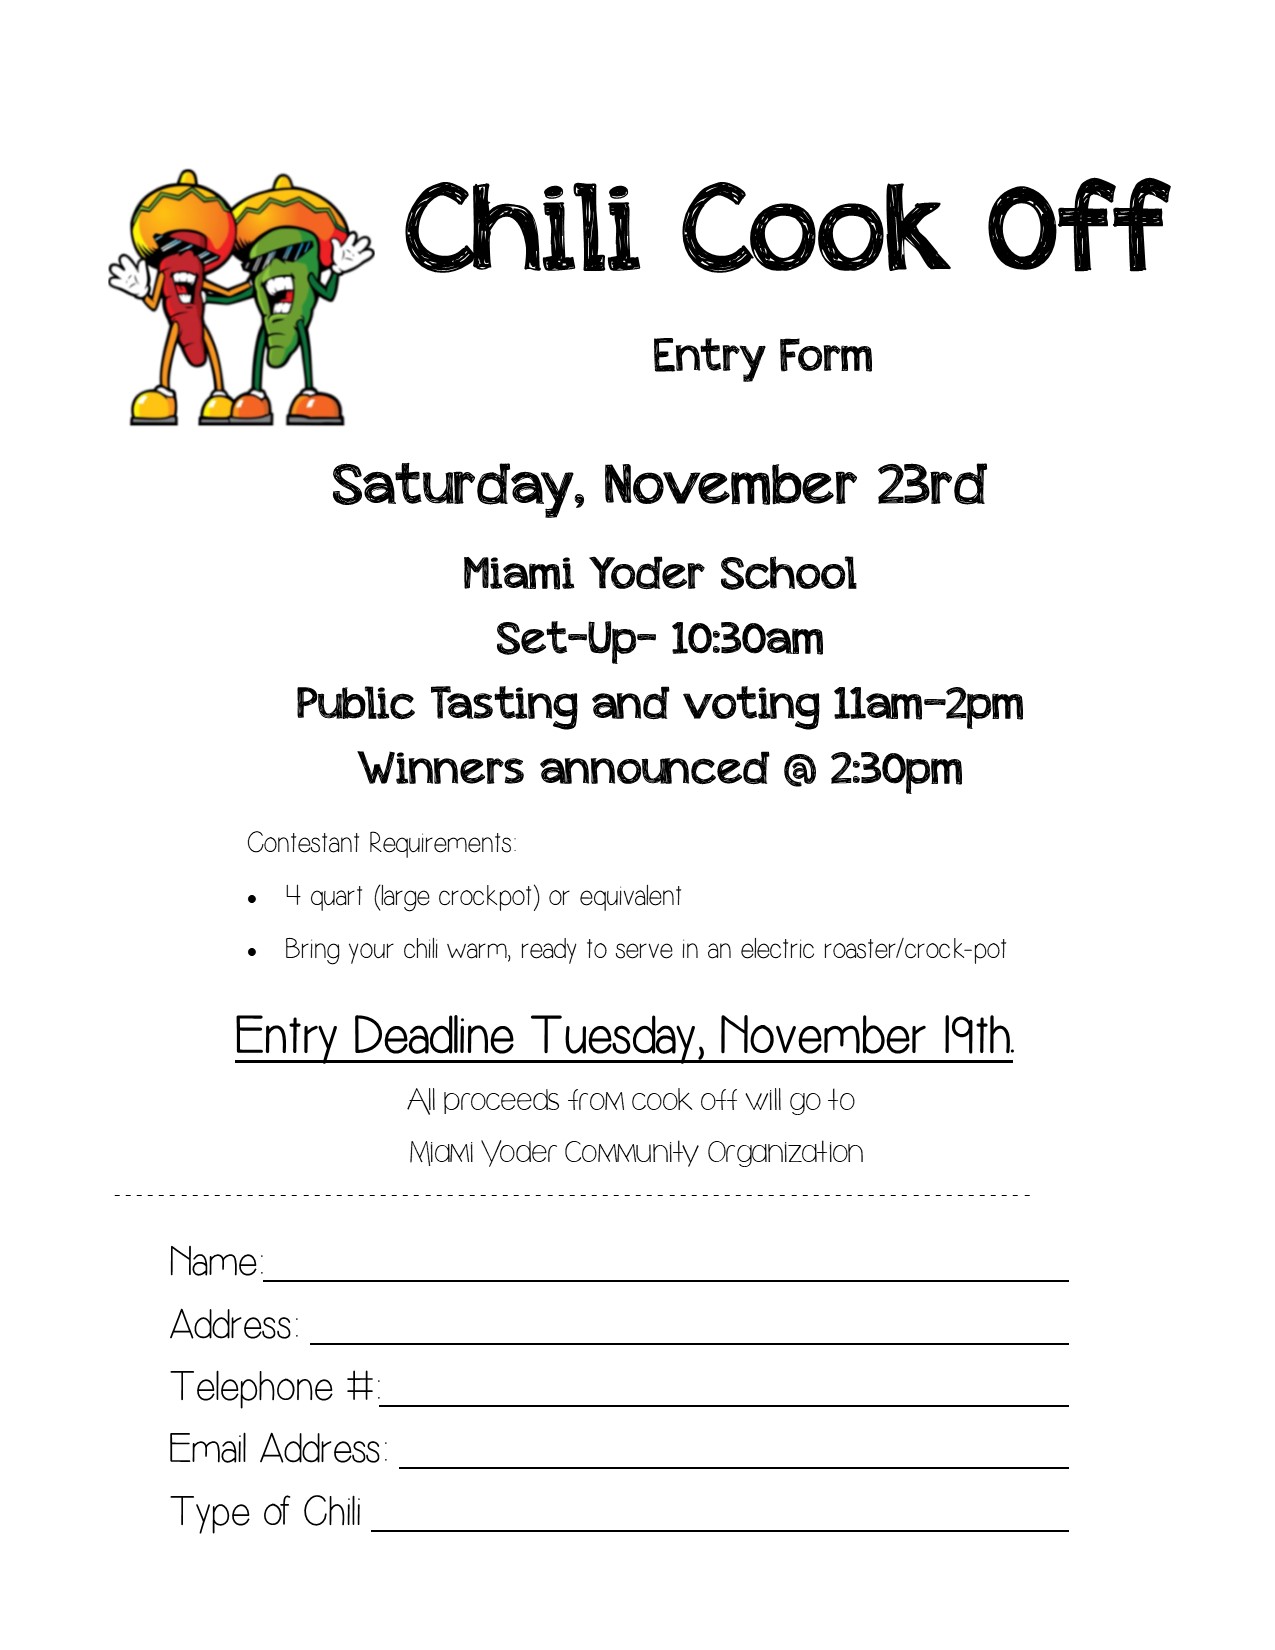 Miami Yoder Jt60 Chili Cook Off November 23rd